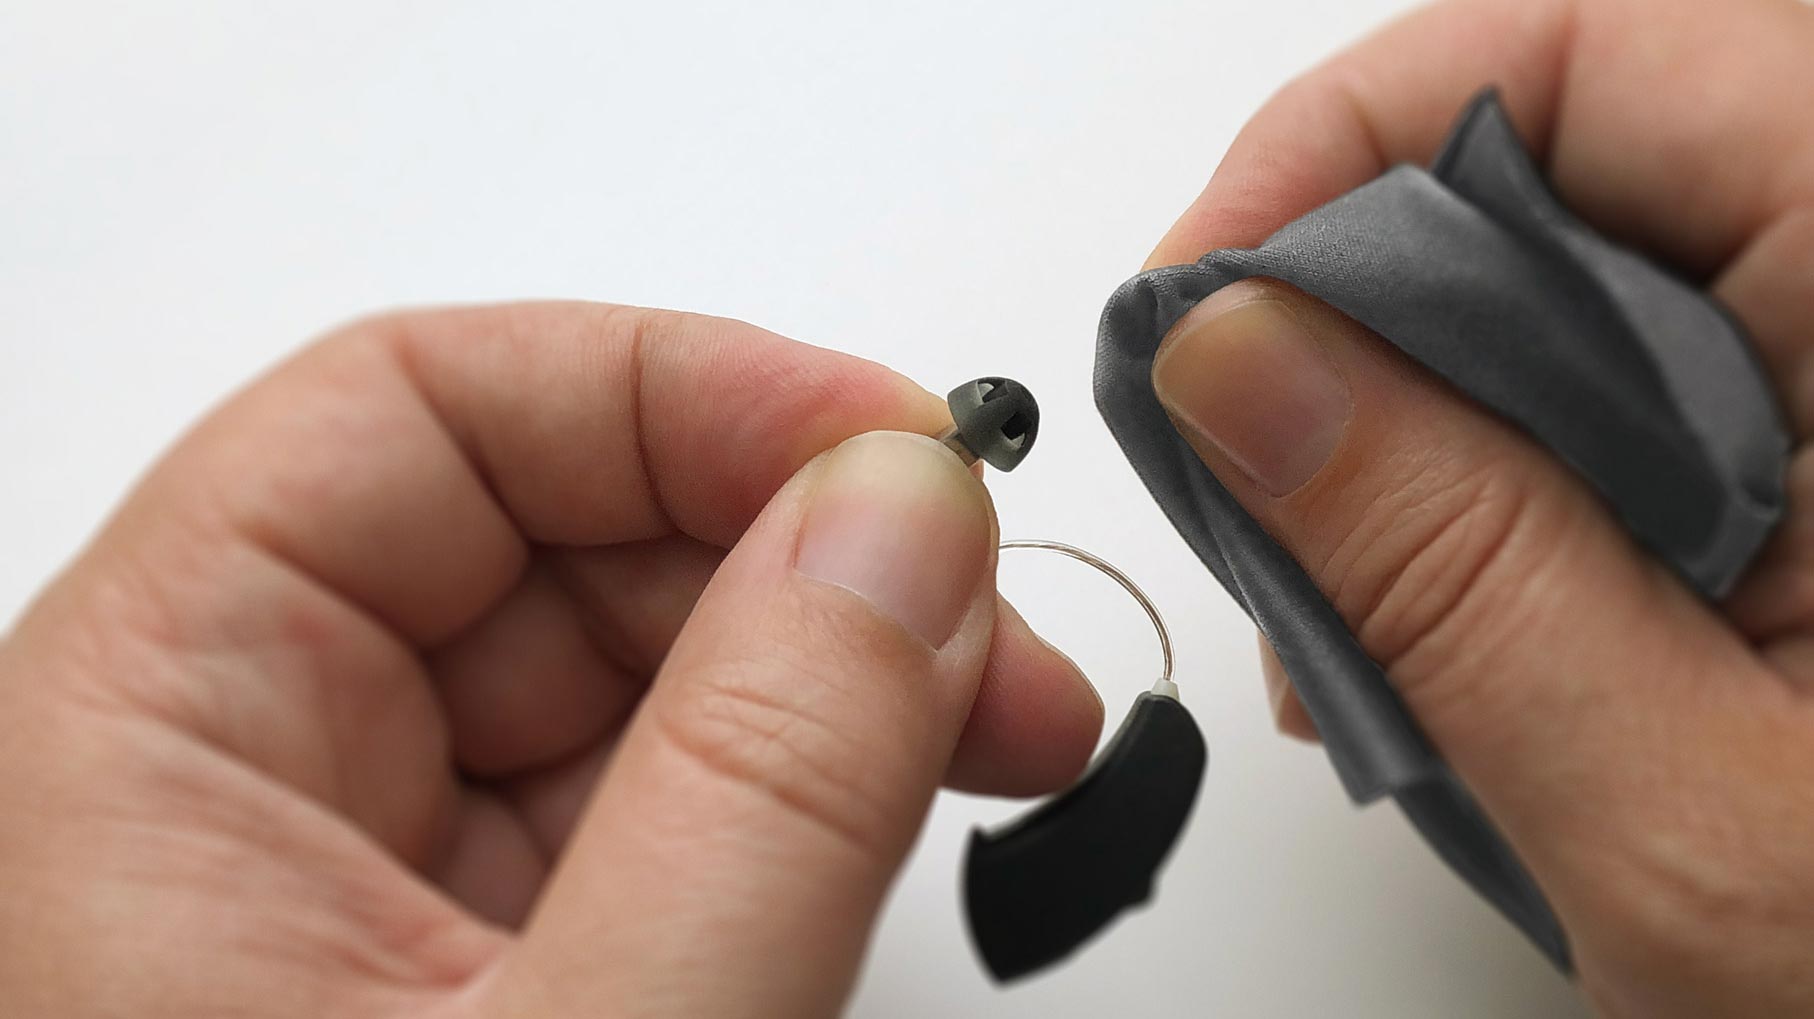 How-to-clean-hearing-aids-image